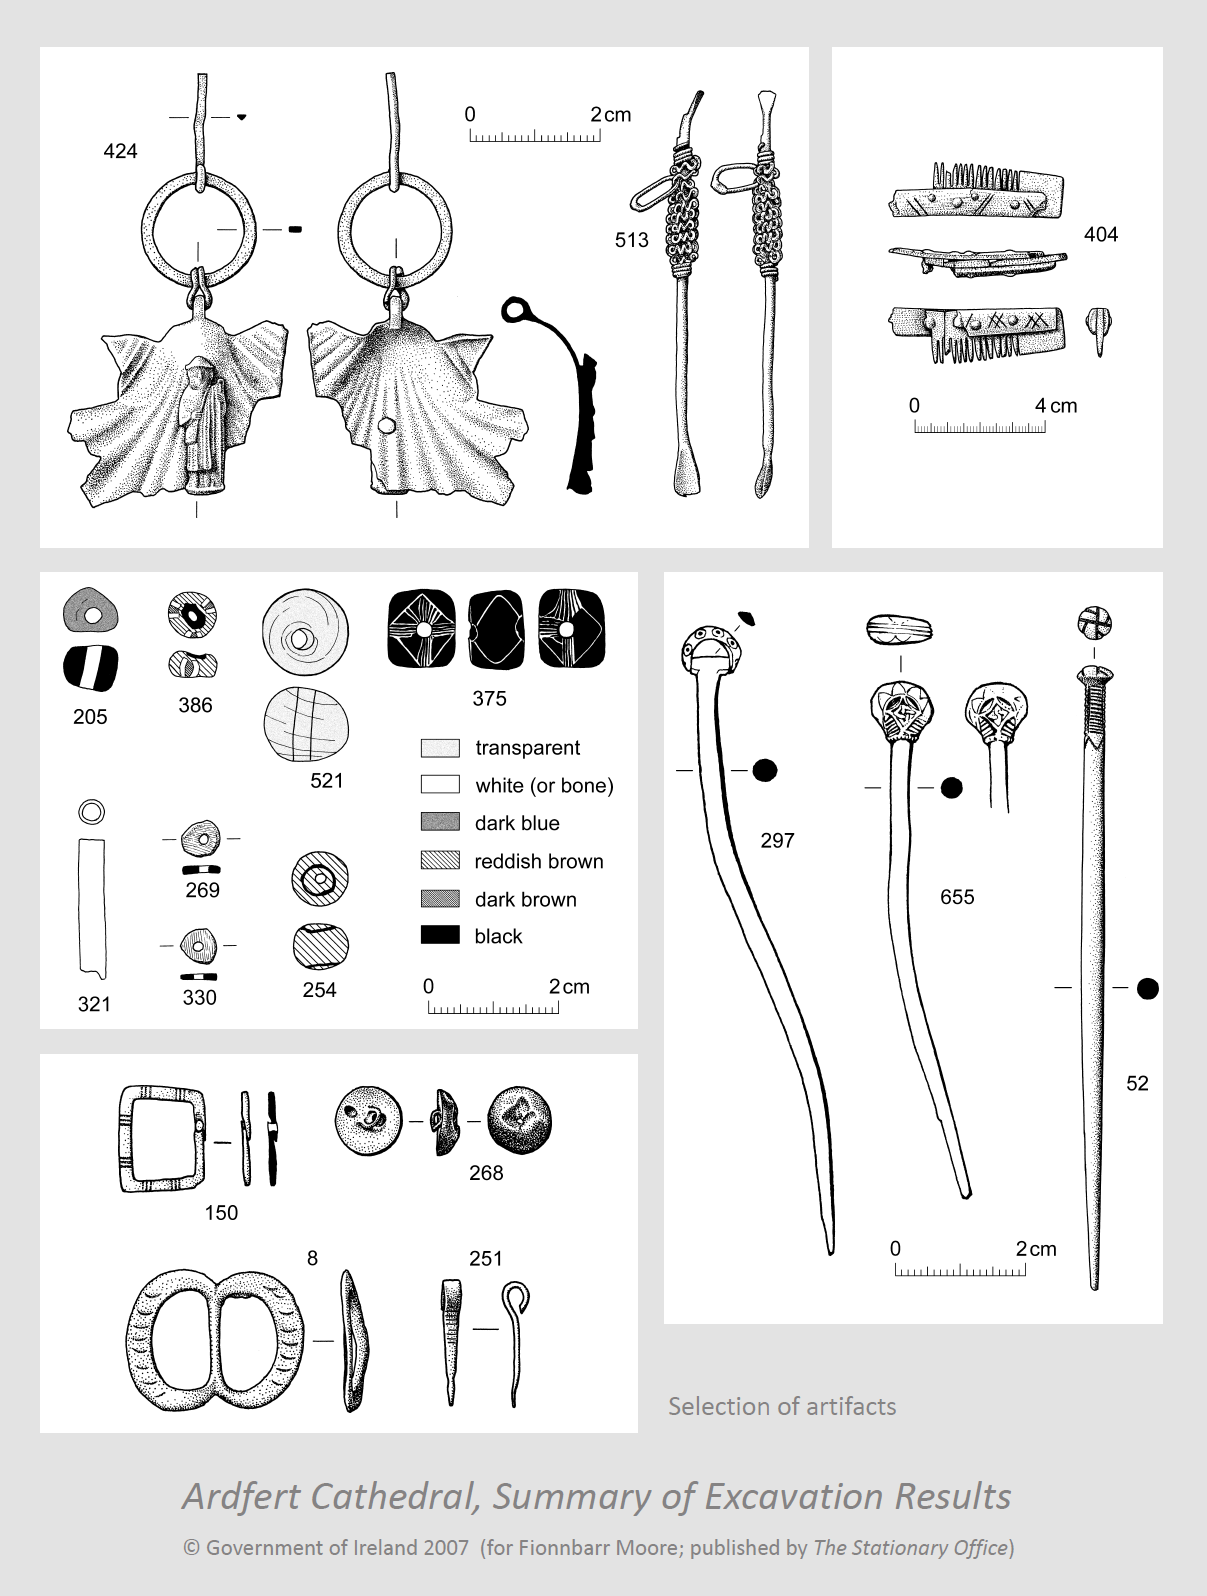 Selection of artifacts form "Ardfert Cathedral, Summary of Excavation Results" (2007)